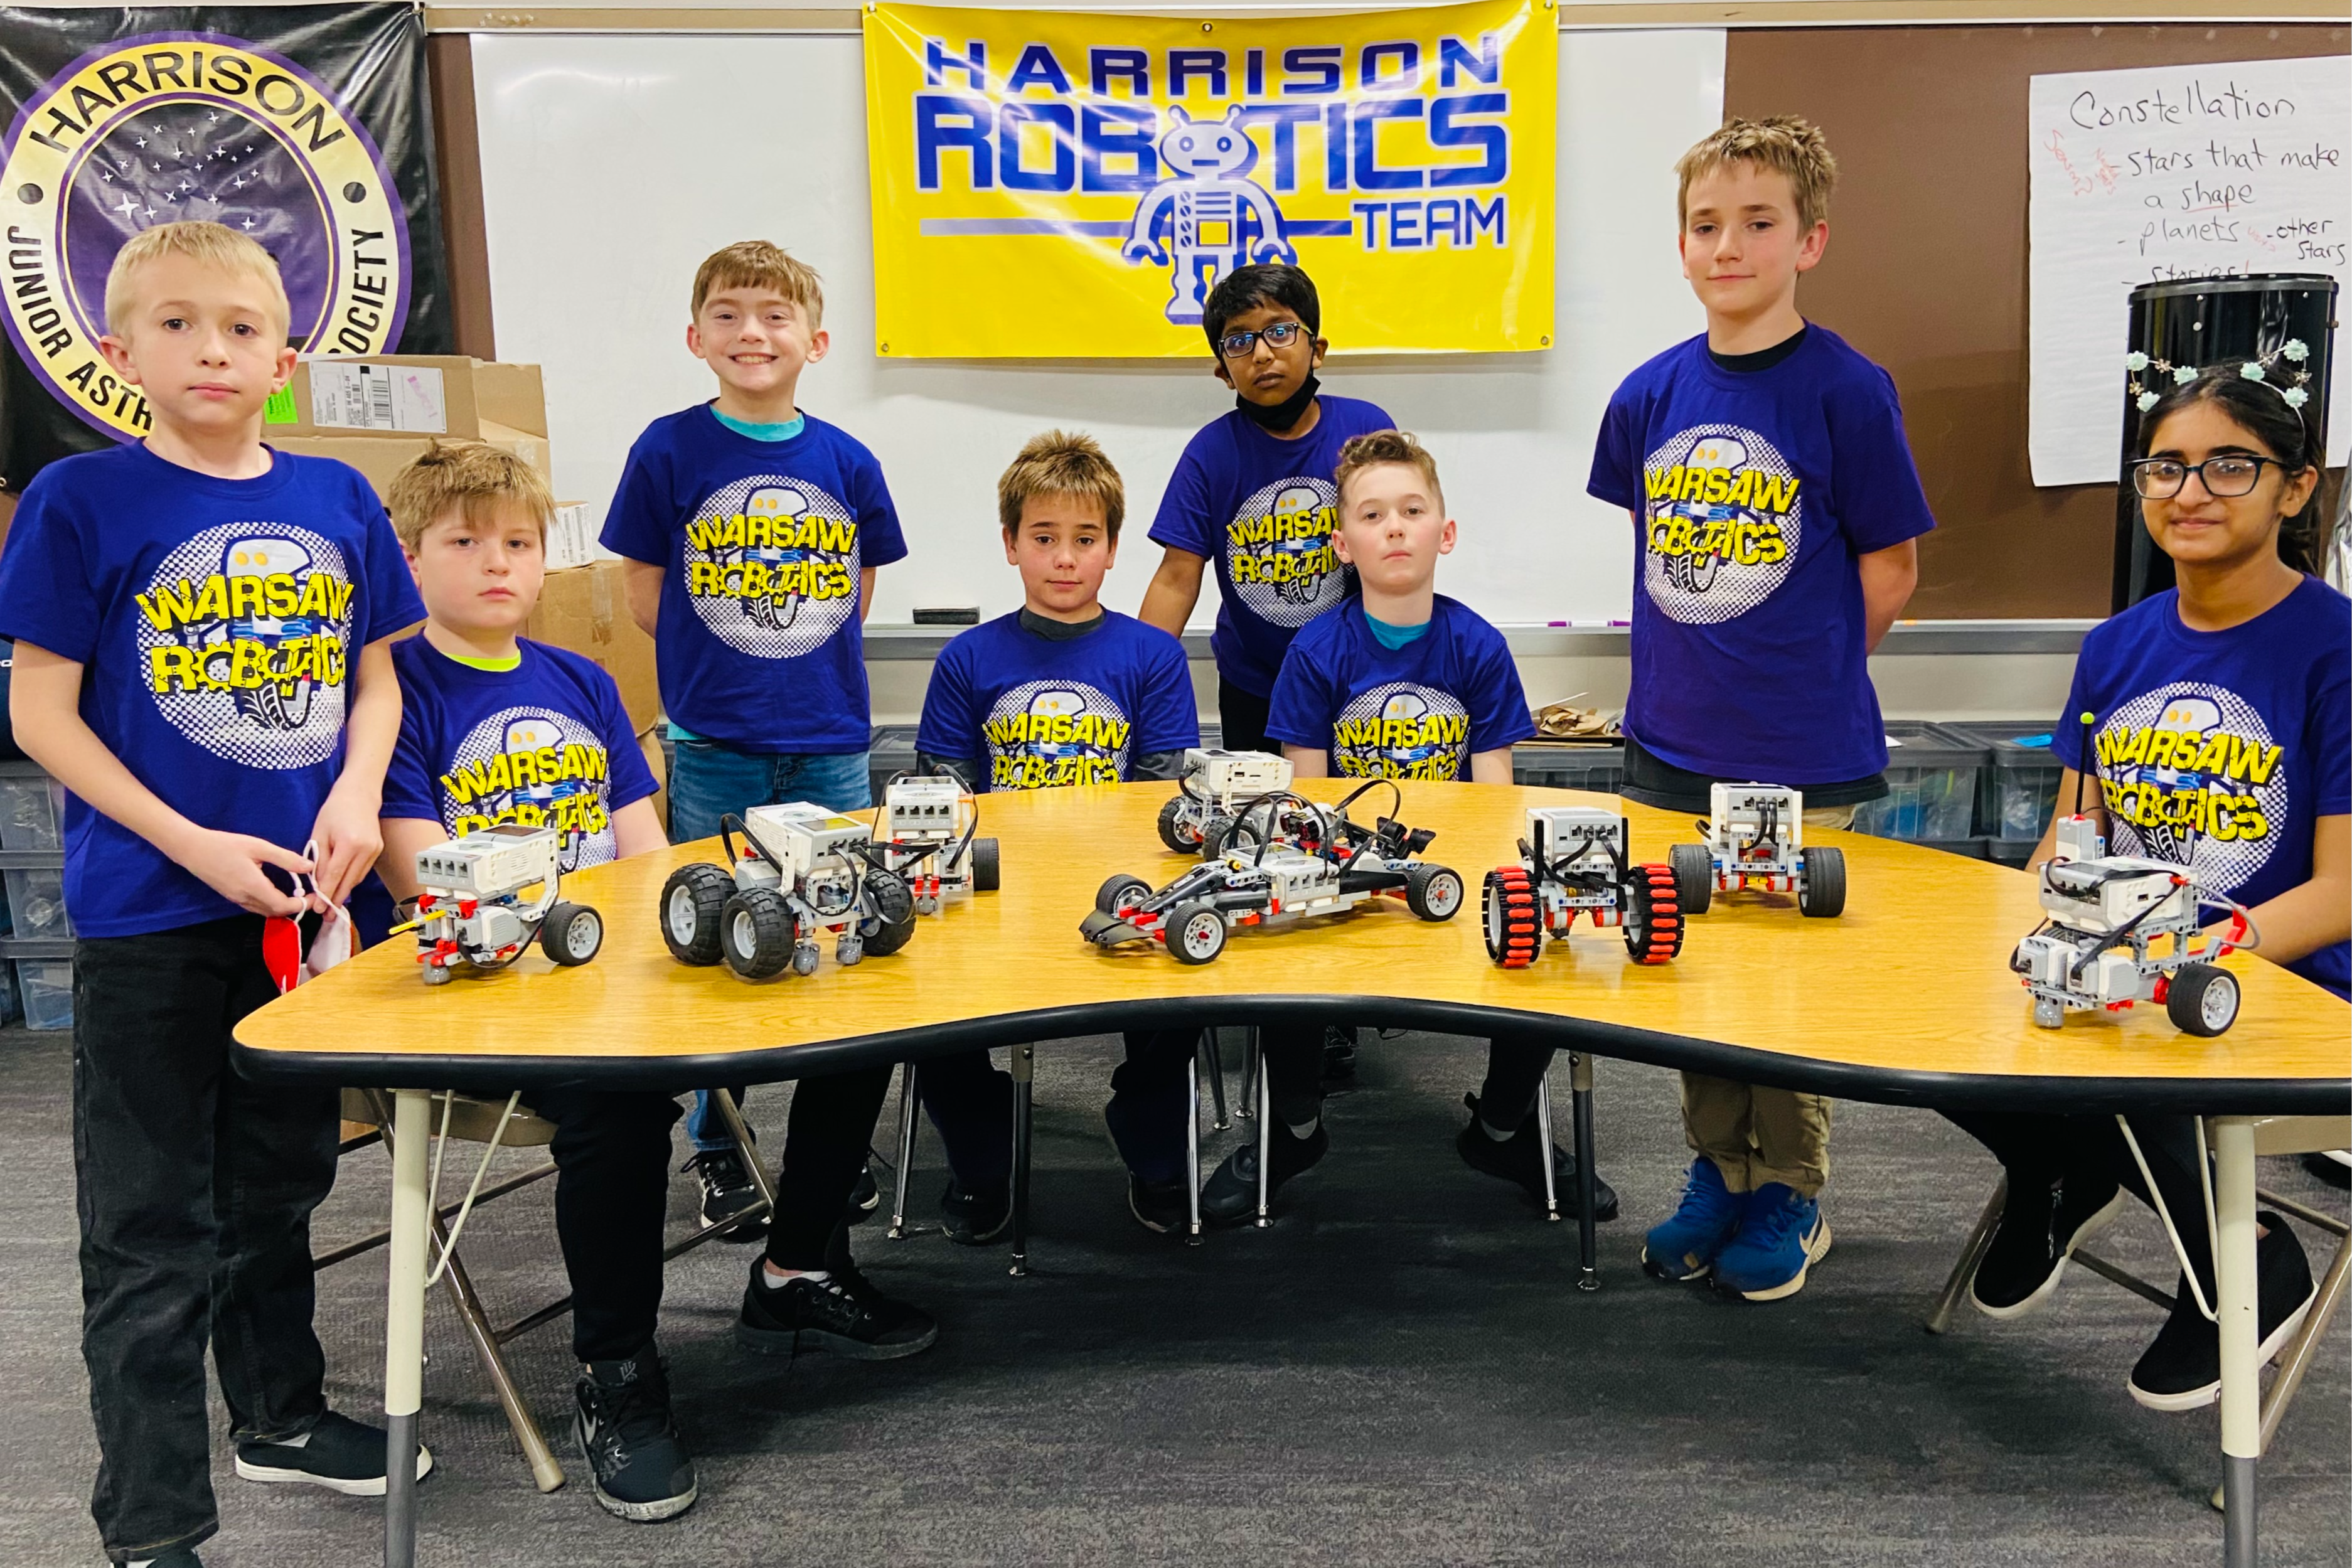 the Warsaw robotics club Harrison Robotics team posing at a table with the robots they built